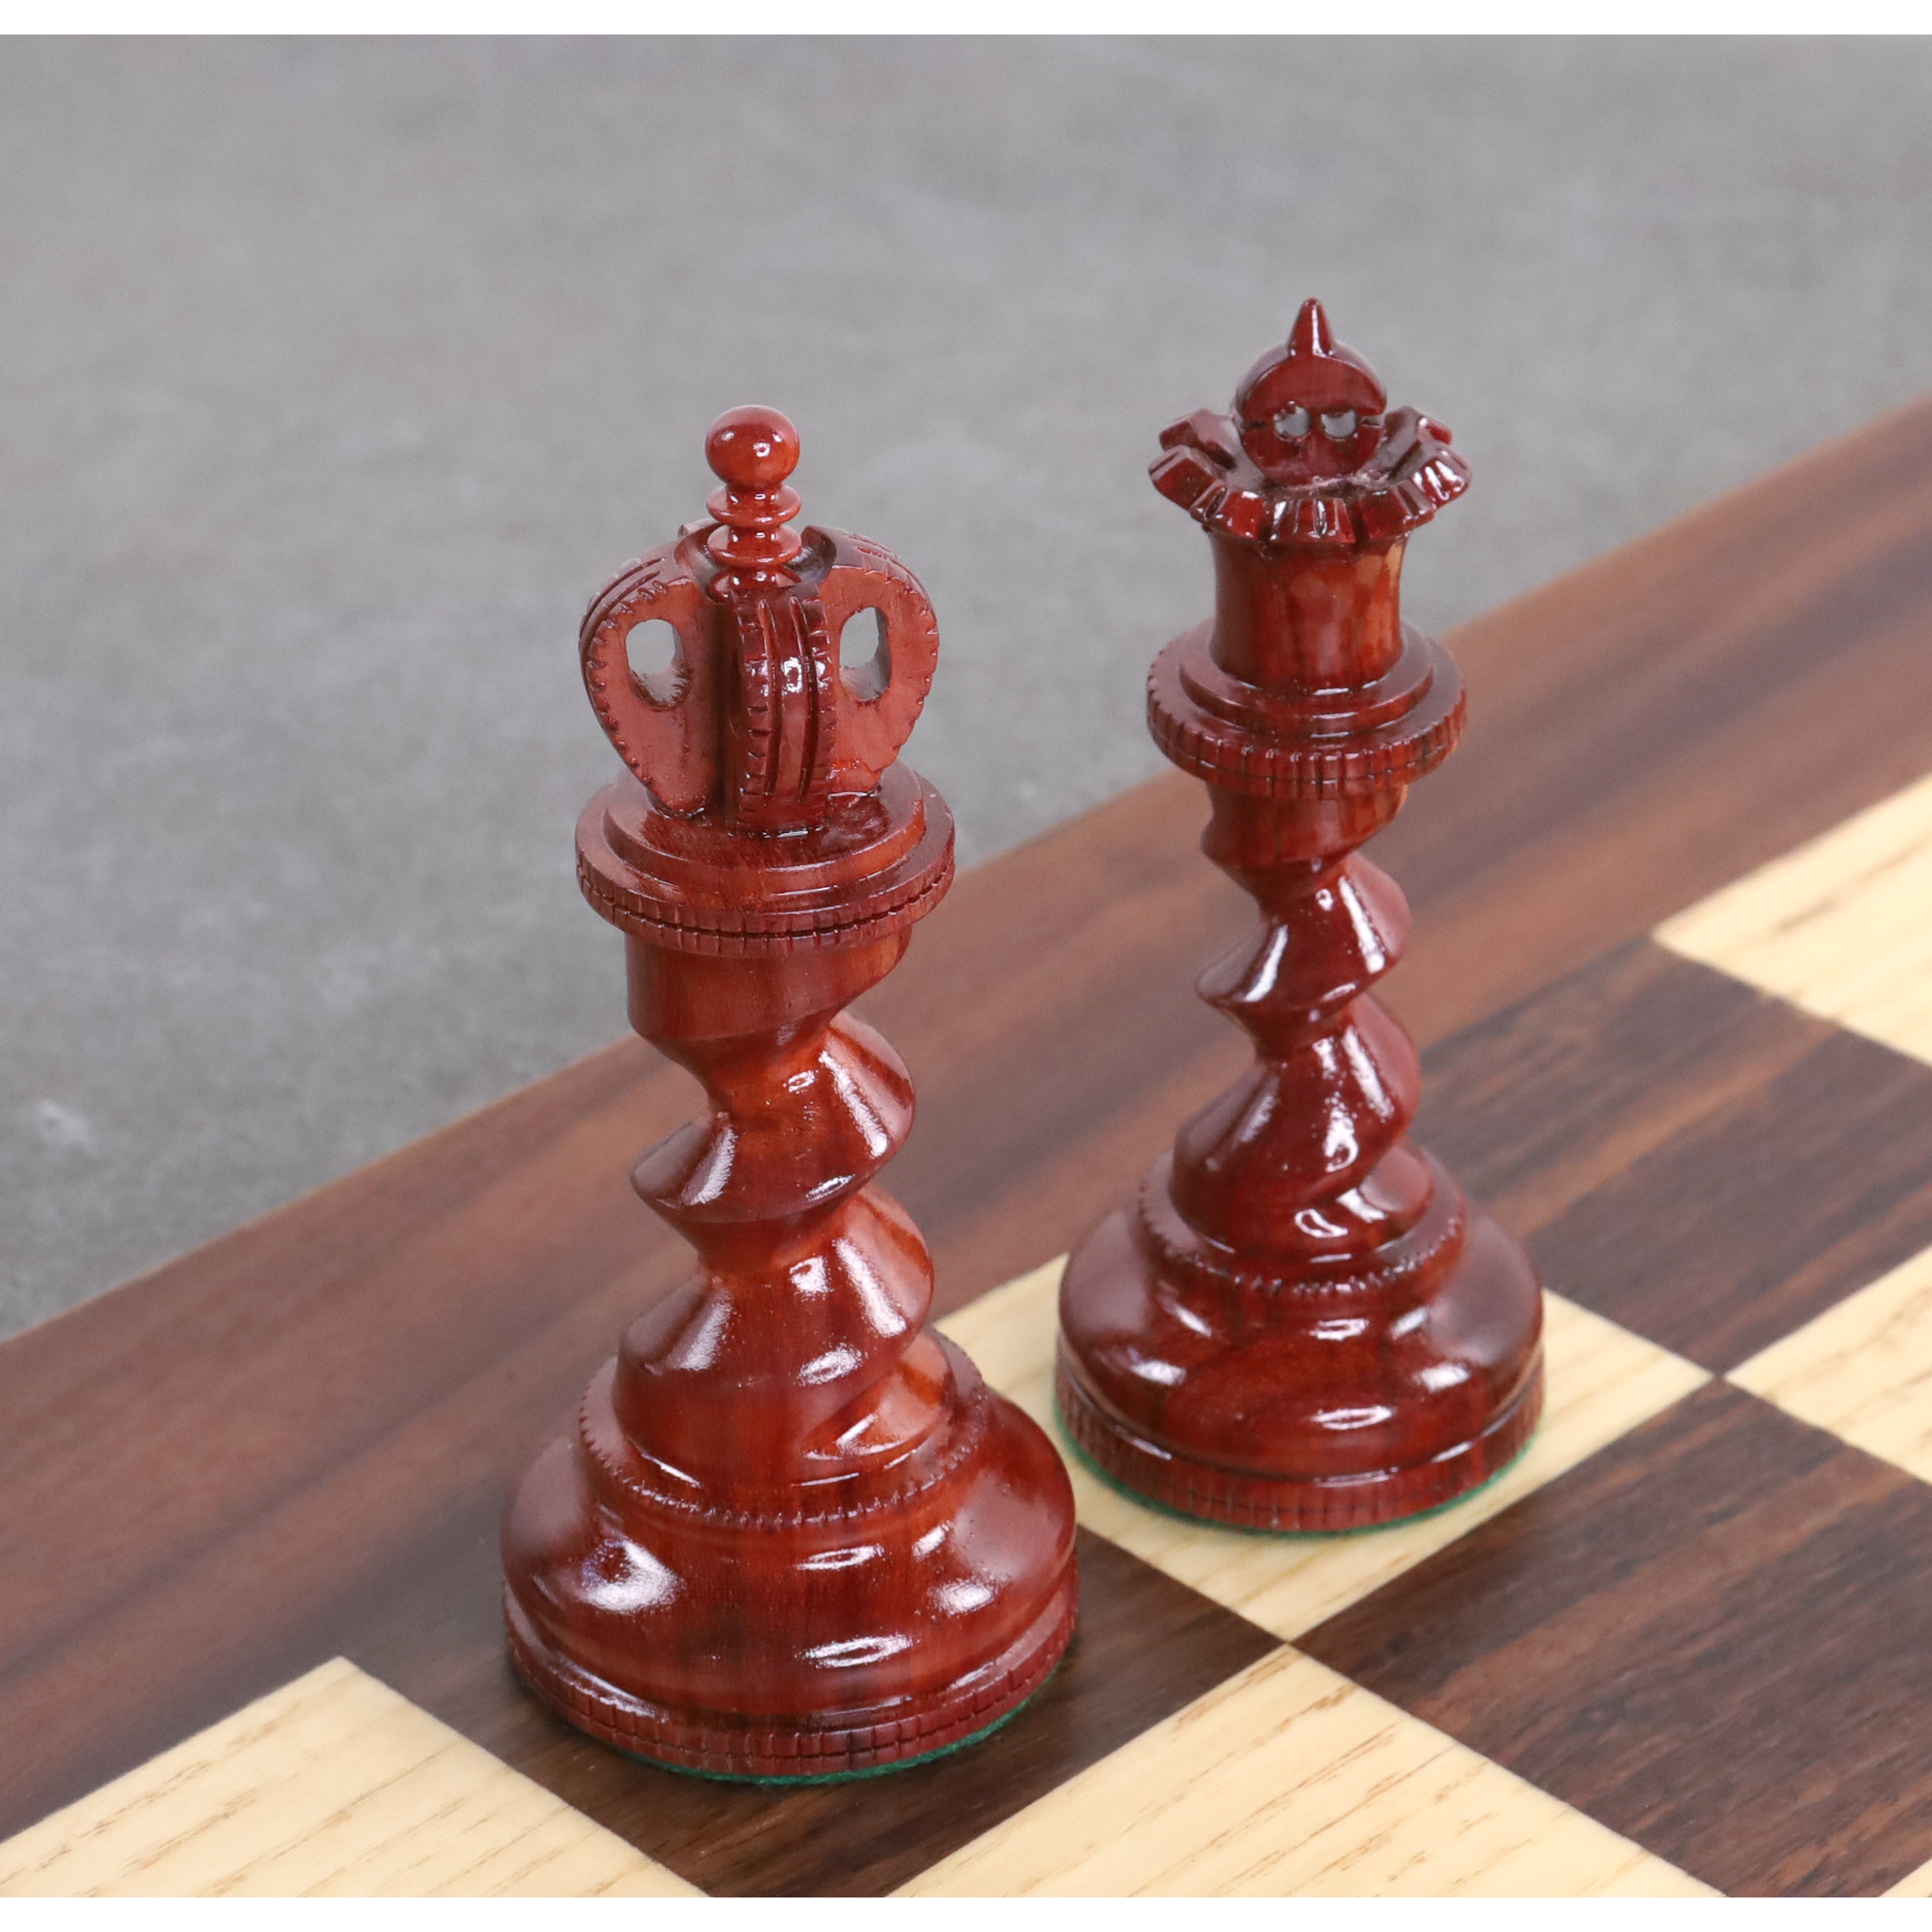 Slightly Imperfect 4.3" Grazing Knight Luxury Staunton Chess Pieces Only Set - Lacquered Bud Rosewood